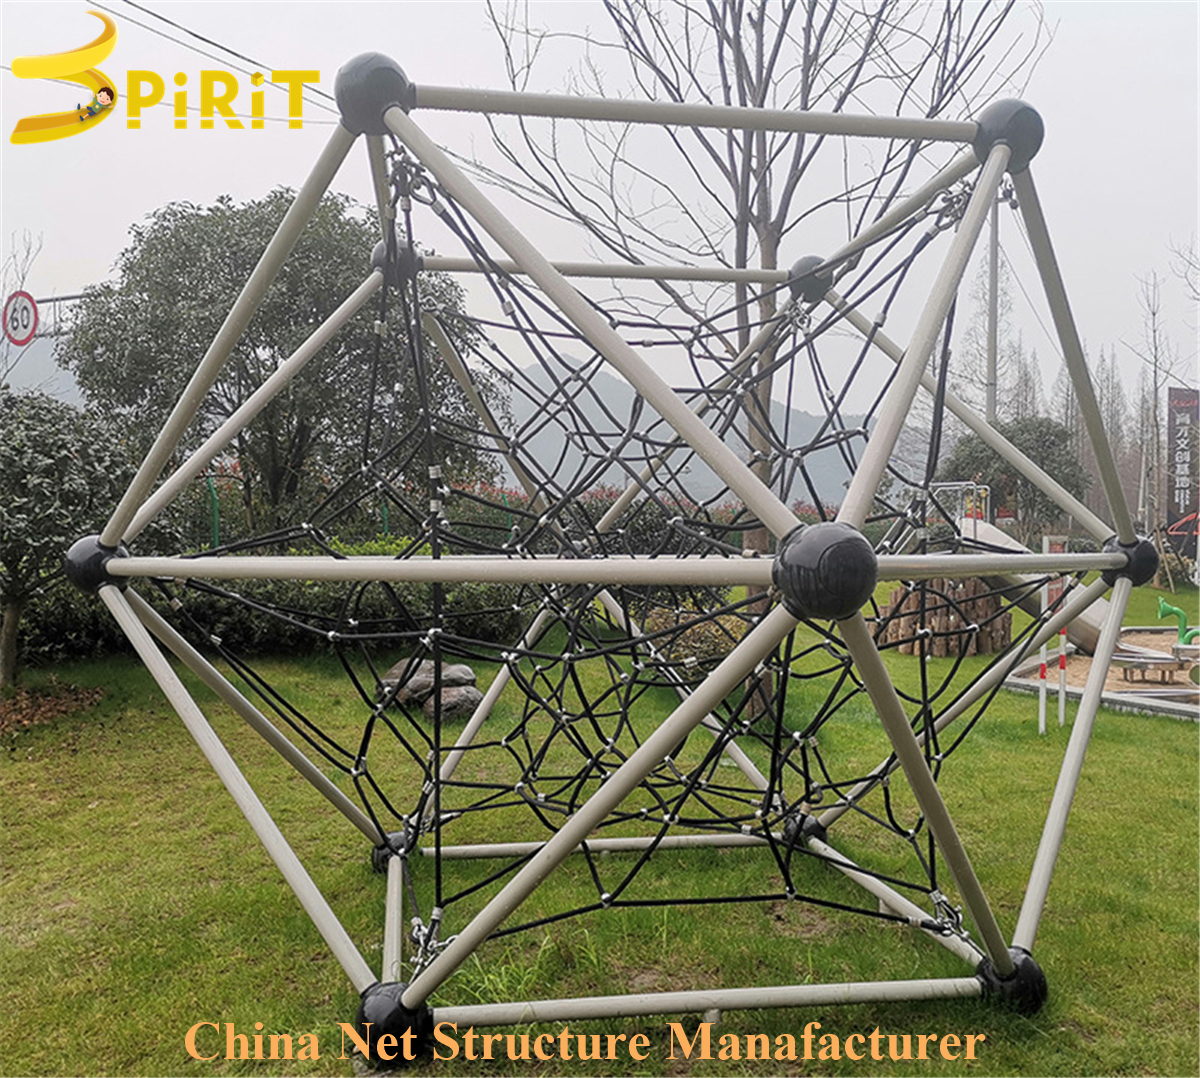 Where to buy Commercial playground climbing structures for preschool?-SPIRIT PLAY,Outdoor Playground, Indoor Playground,Trampoline Park,Outdoor Fitness,Inflatable,Soft Playground,Ninja Warrior,Trampoline Park,Playground Structure,Play Structure,Outdoor Fitness,Water Park,Play System,Freestanding,Interactive,independente ,Inklusibo, Park, Pagsaka sa Bungbong, Dula sa Bata